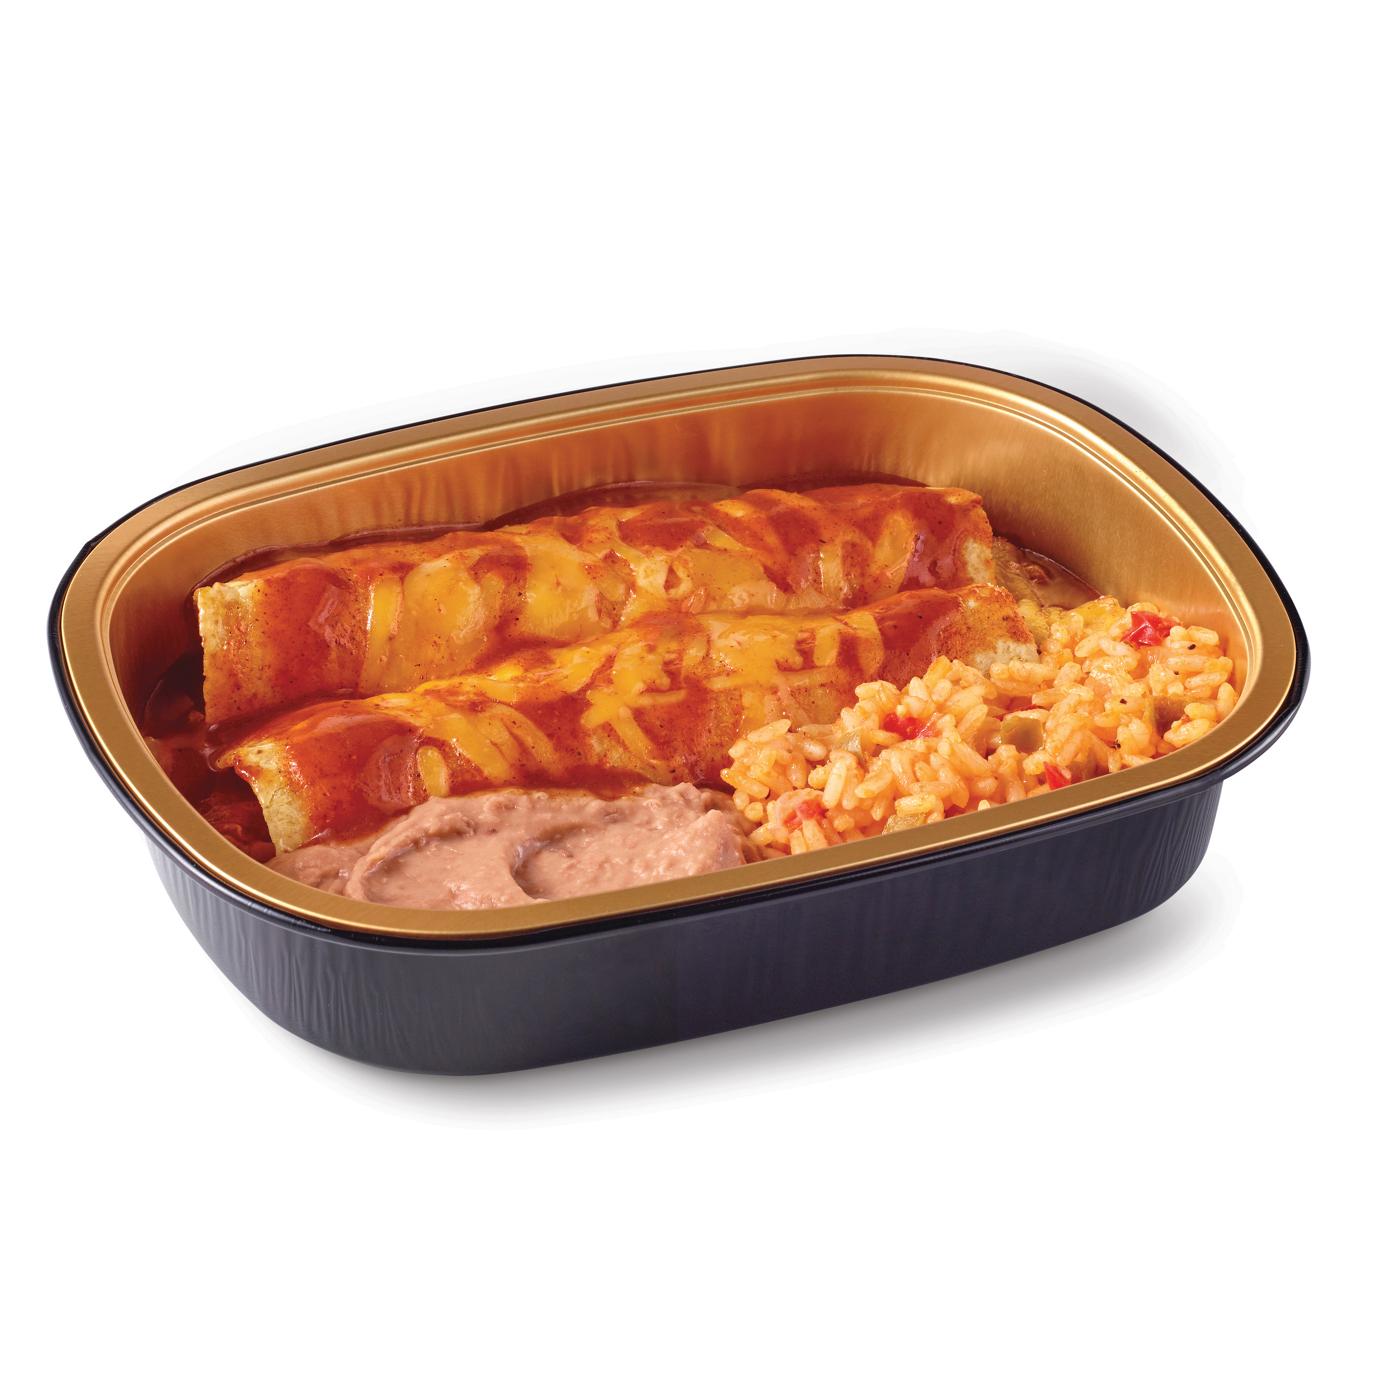 Meal Simple by H-E-B Cheese Enchiladas with Mexican Rice & Refried Beans; image 3 of 4